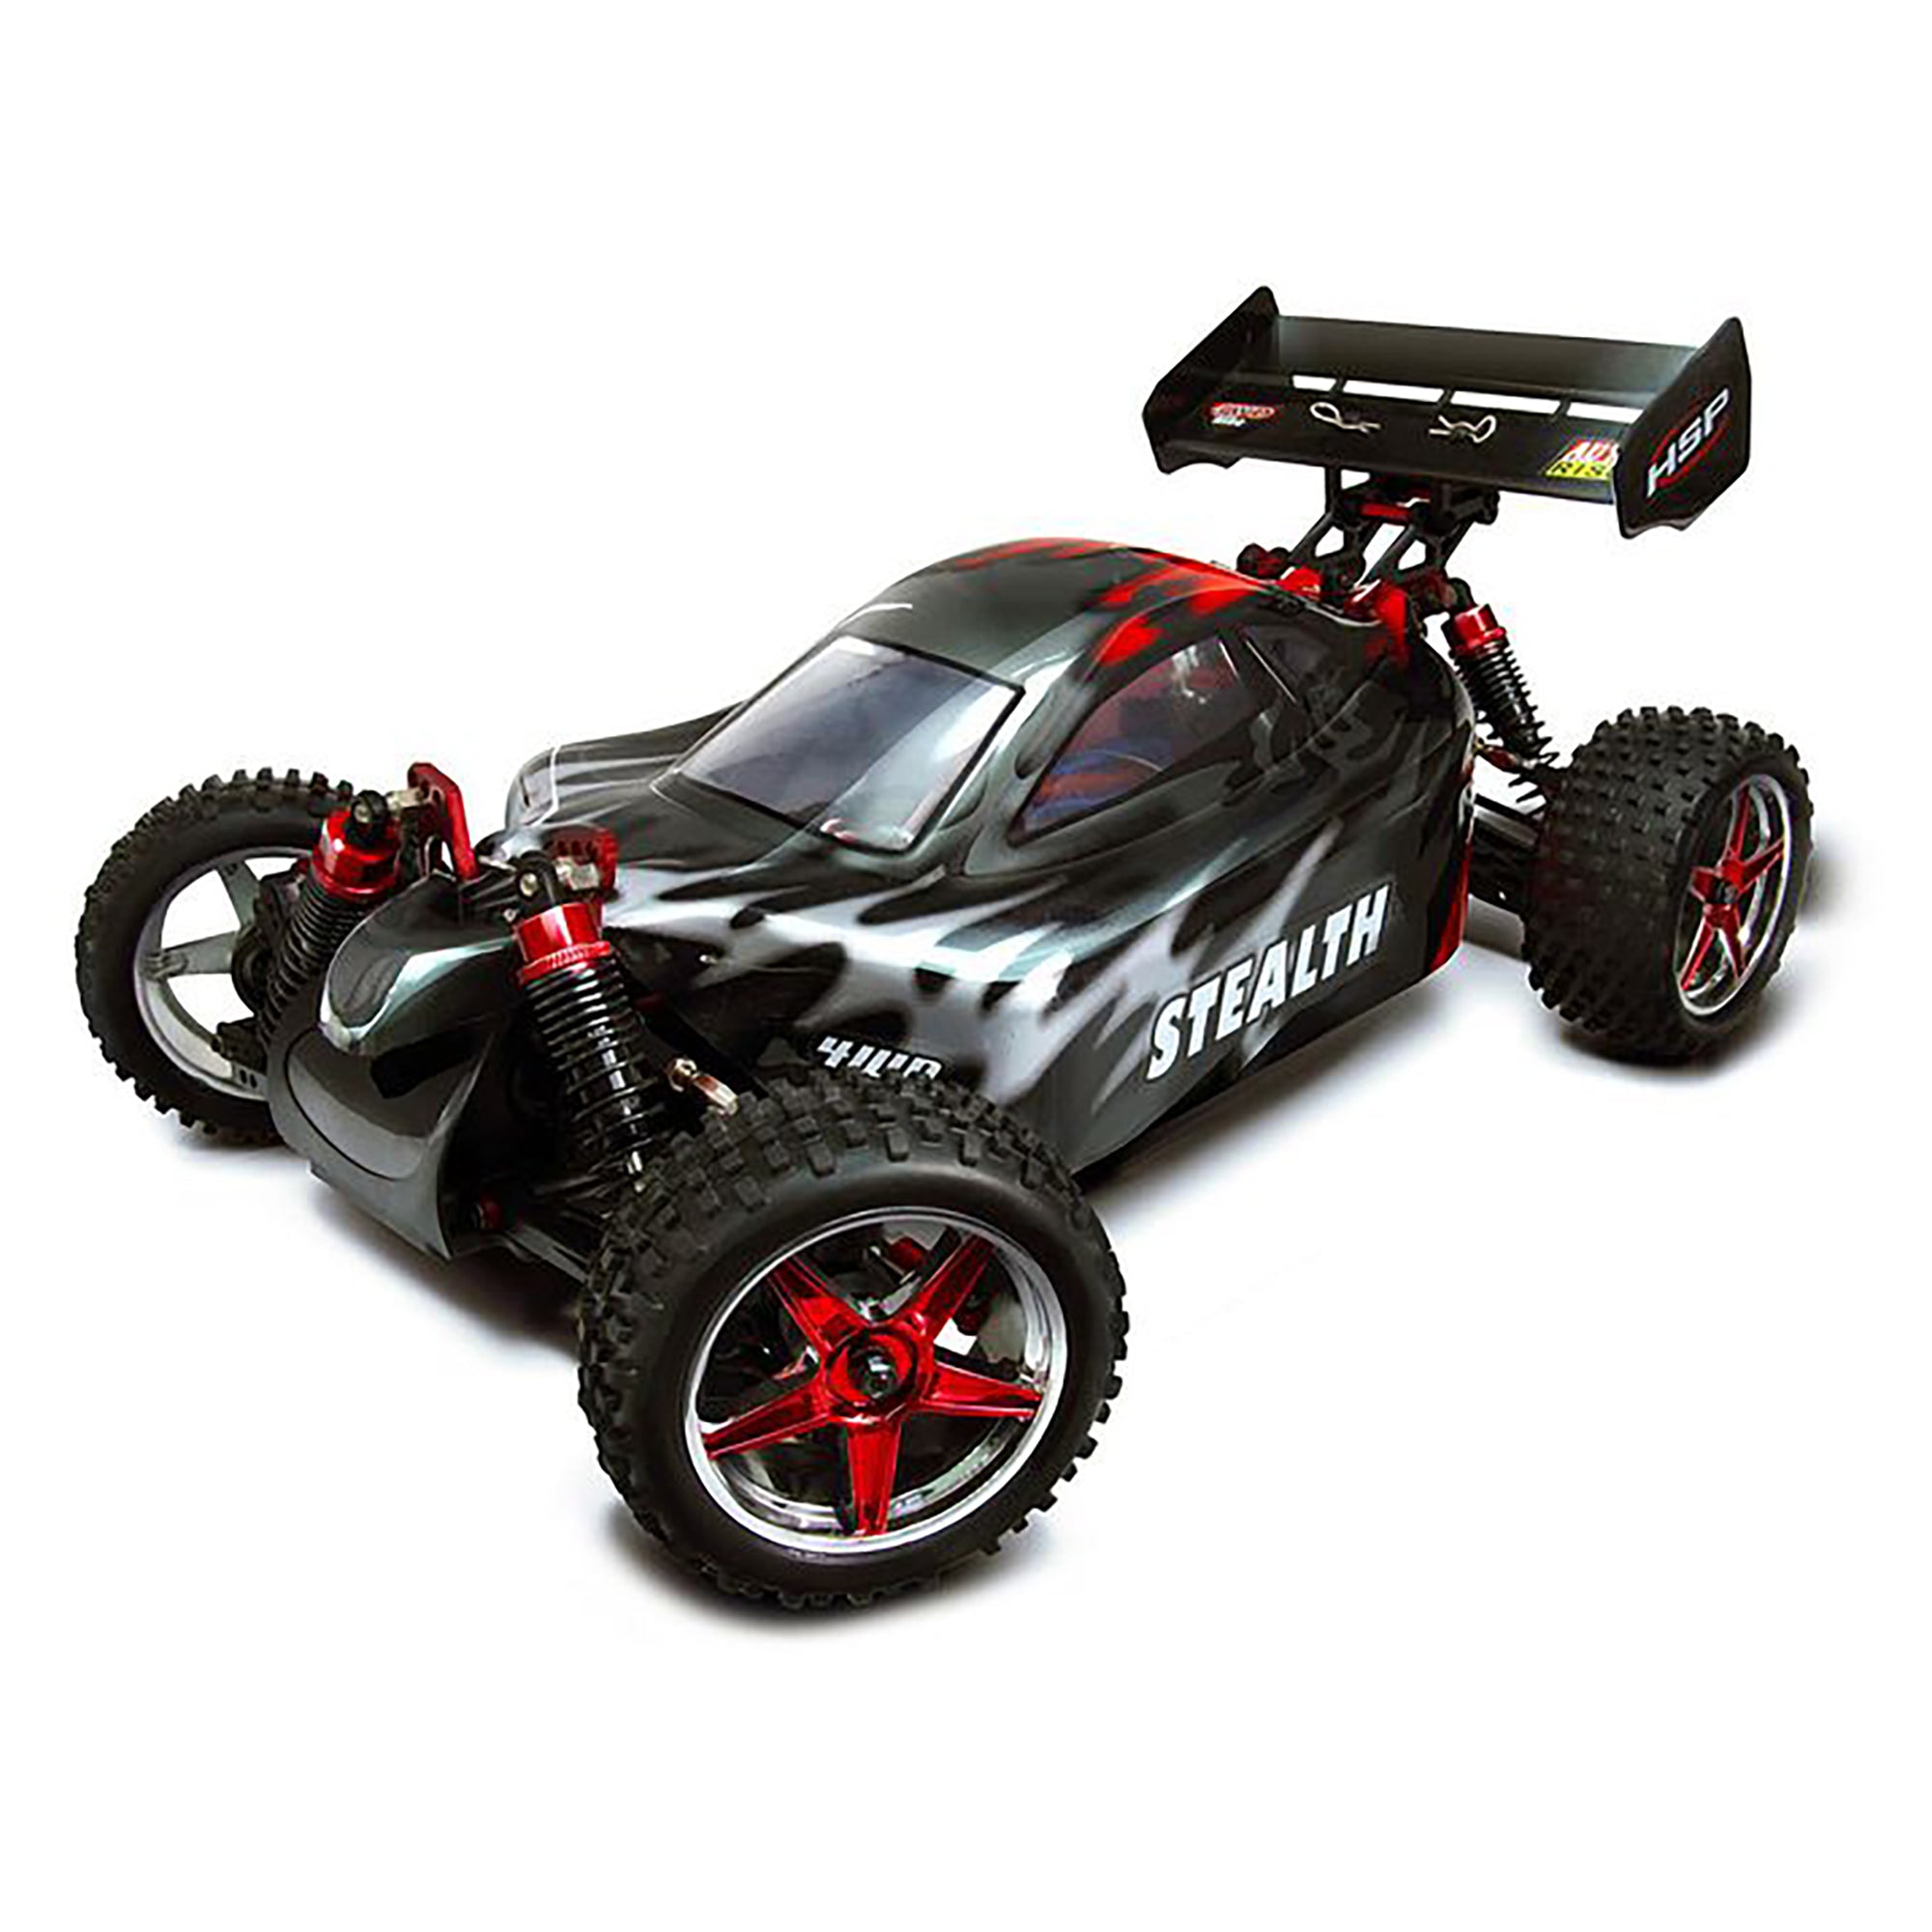 HSP Racing 94106-88801 Stealth 2.4GHz 2SP Nitro 4WD Off Road 1/10 Scale RC Buggy